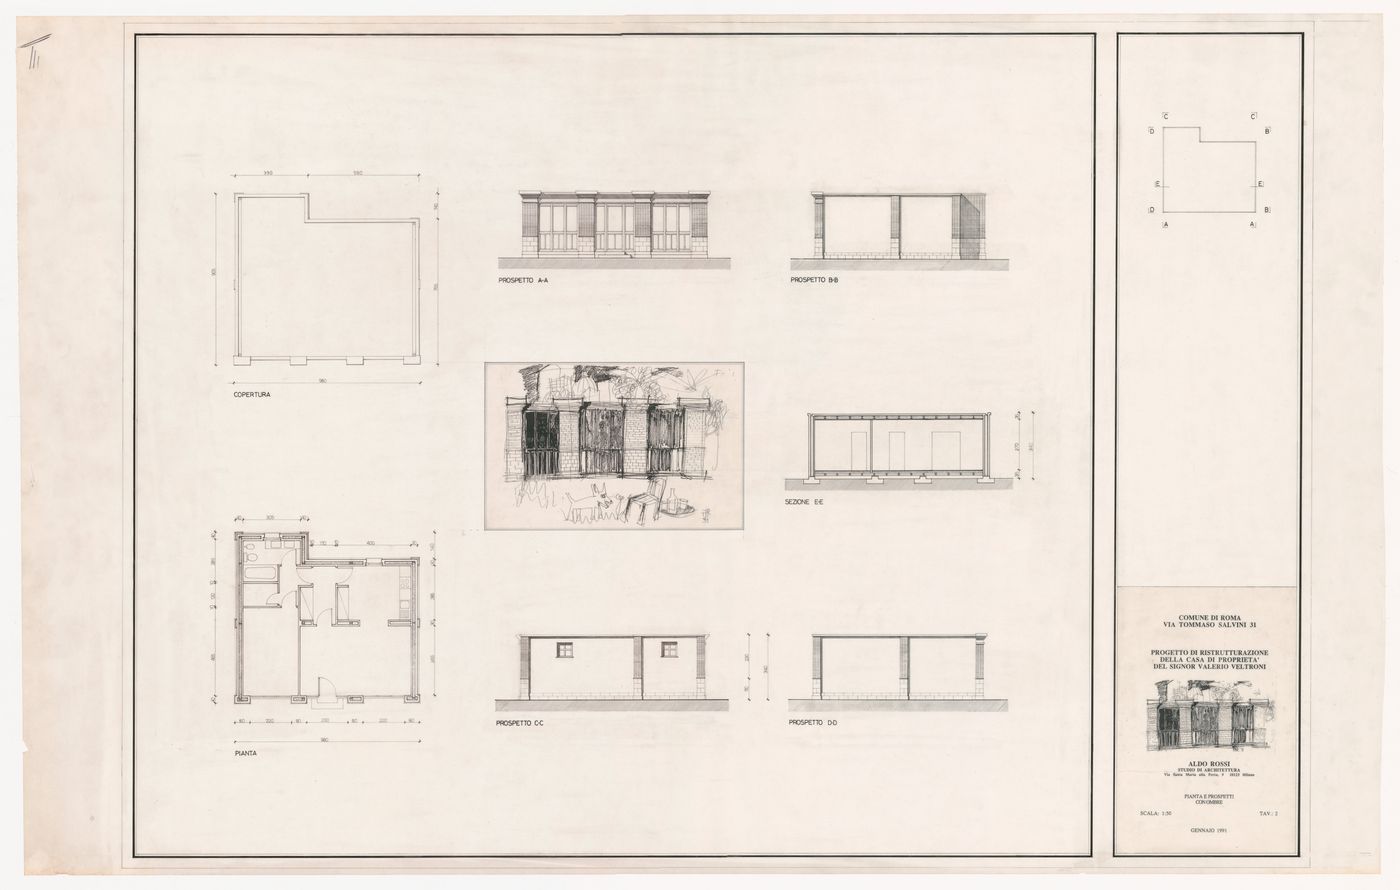 Elevations, section, plan, and sketch for Casa Veltroni, Rome, Italy